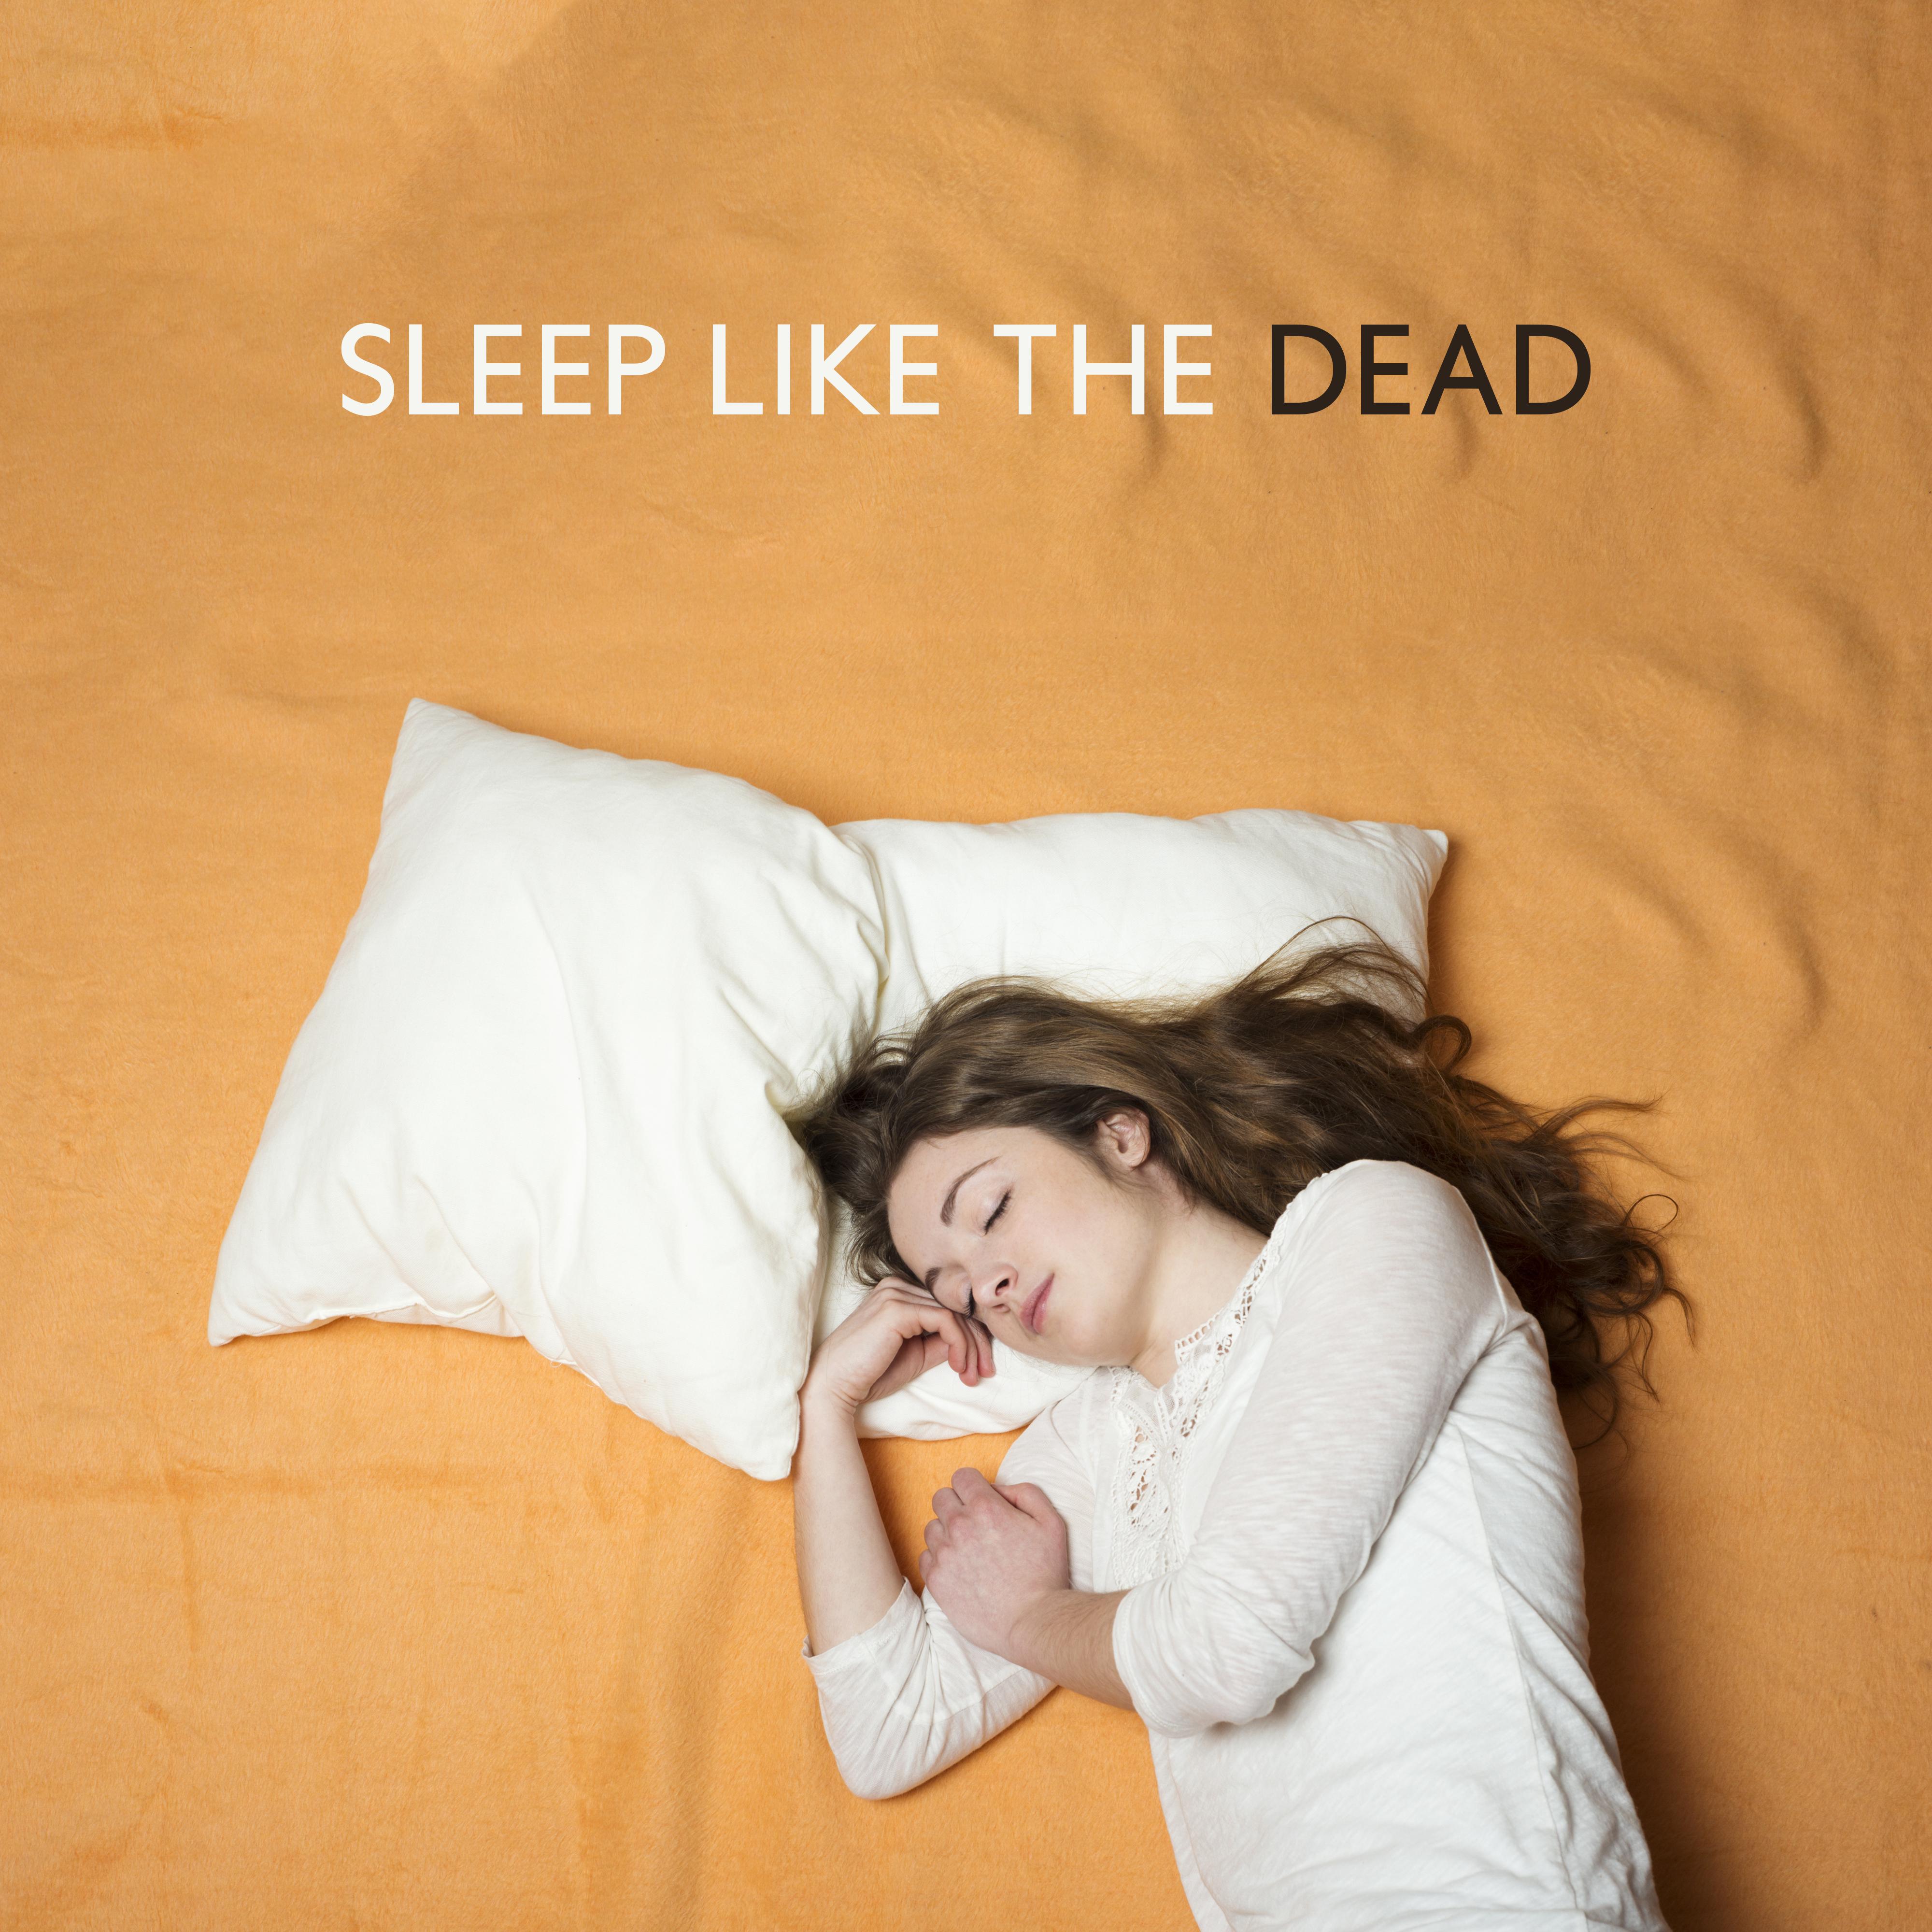 Sleep Like the Dead - Soothing, Calm and Relaxing Melodies that will Quickly Lull You to Sleep